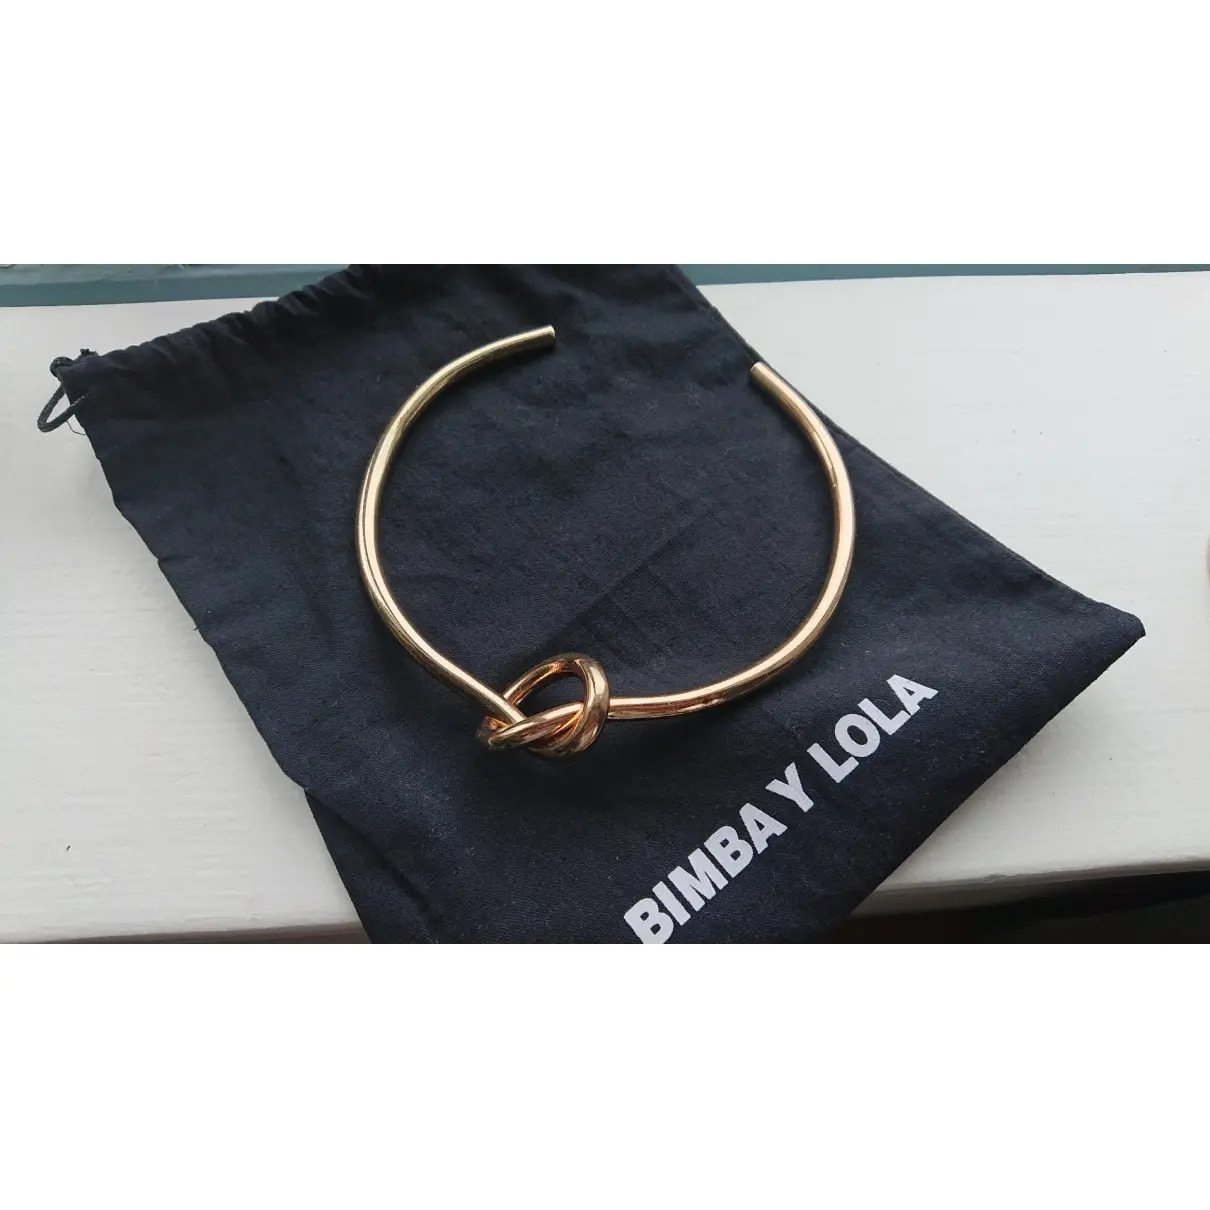 Bimba y Lola Necklace for sale